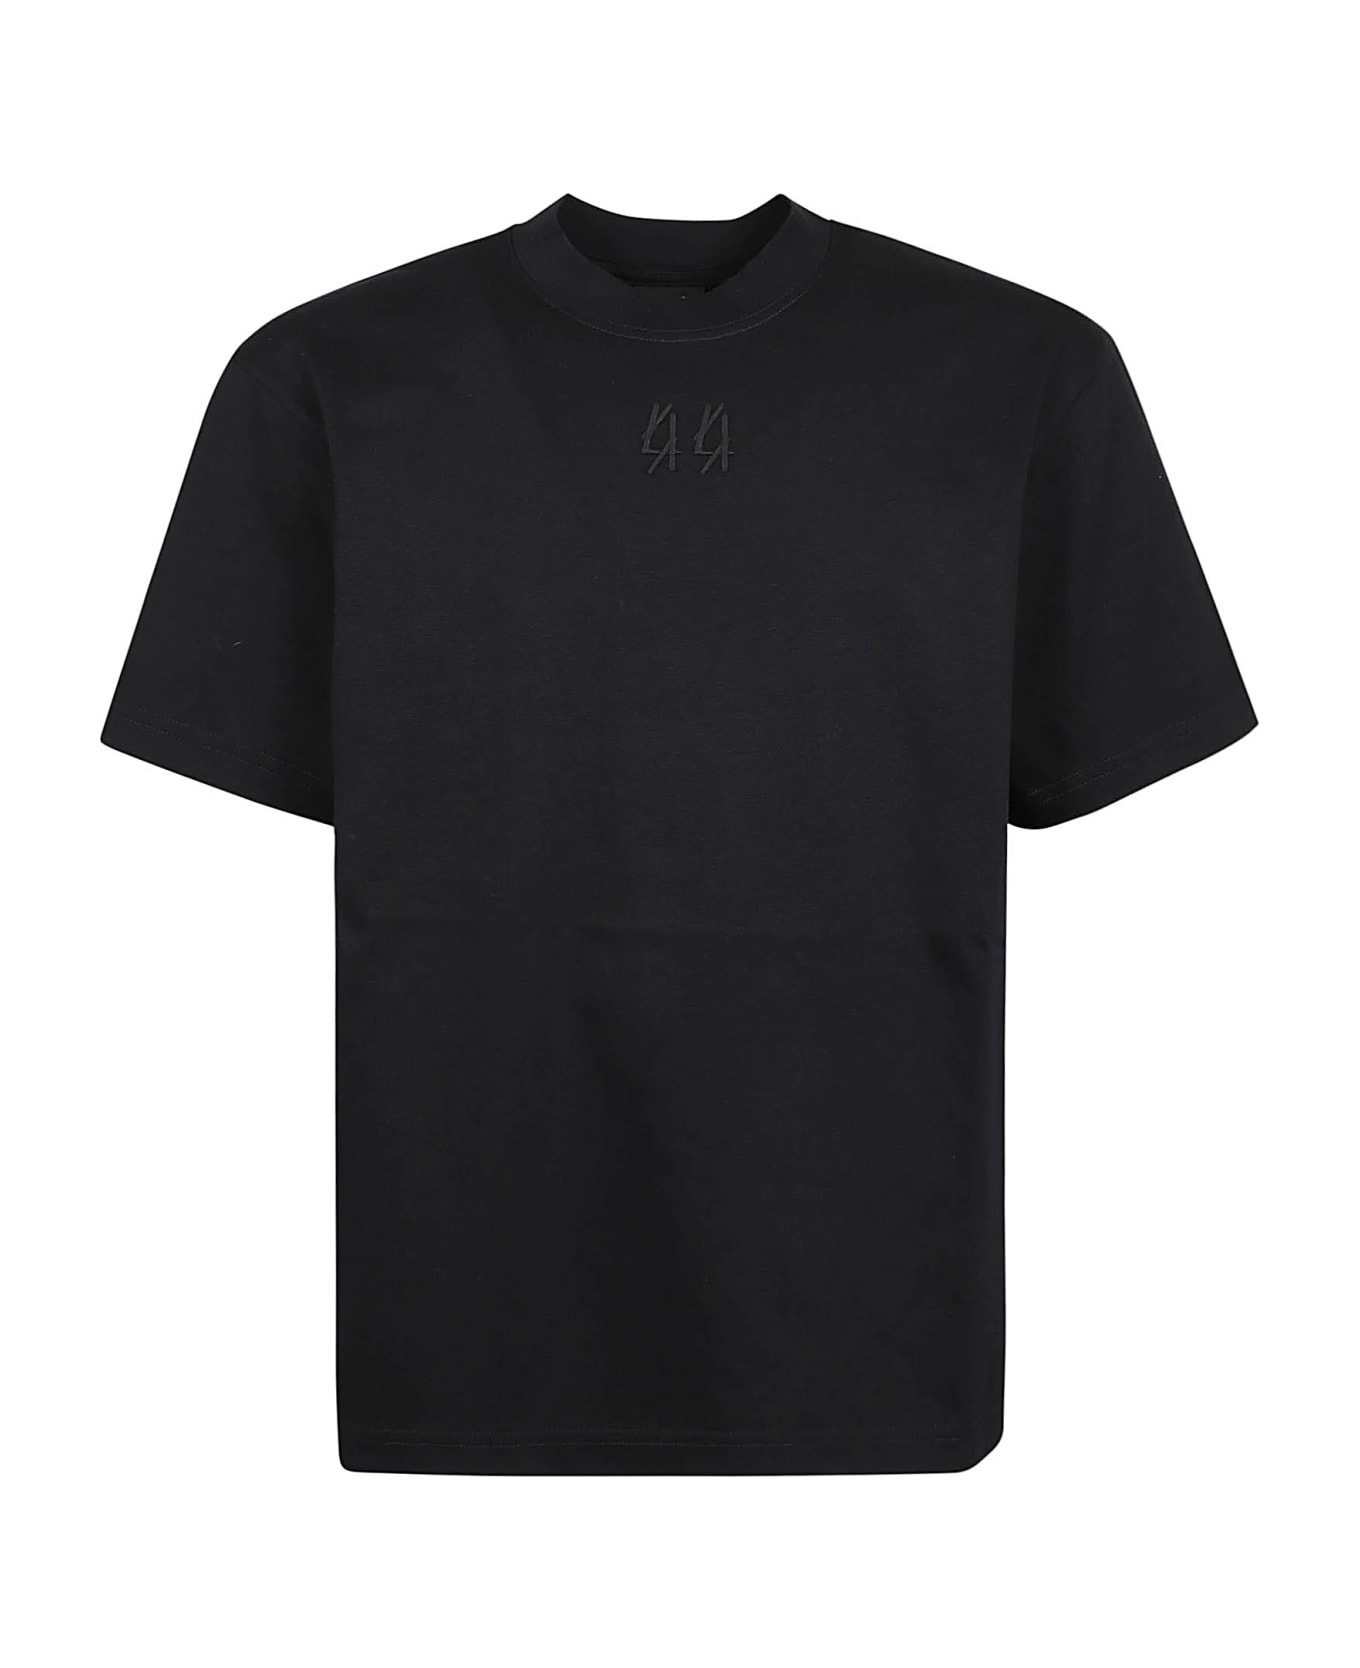 44 Label Group Classic Tee - Black The Enemy Print